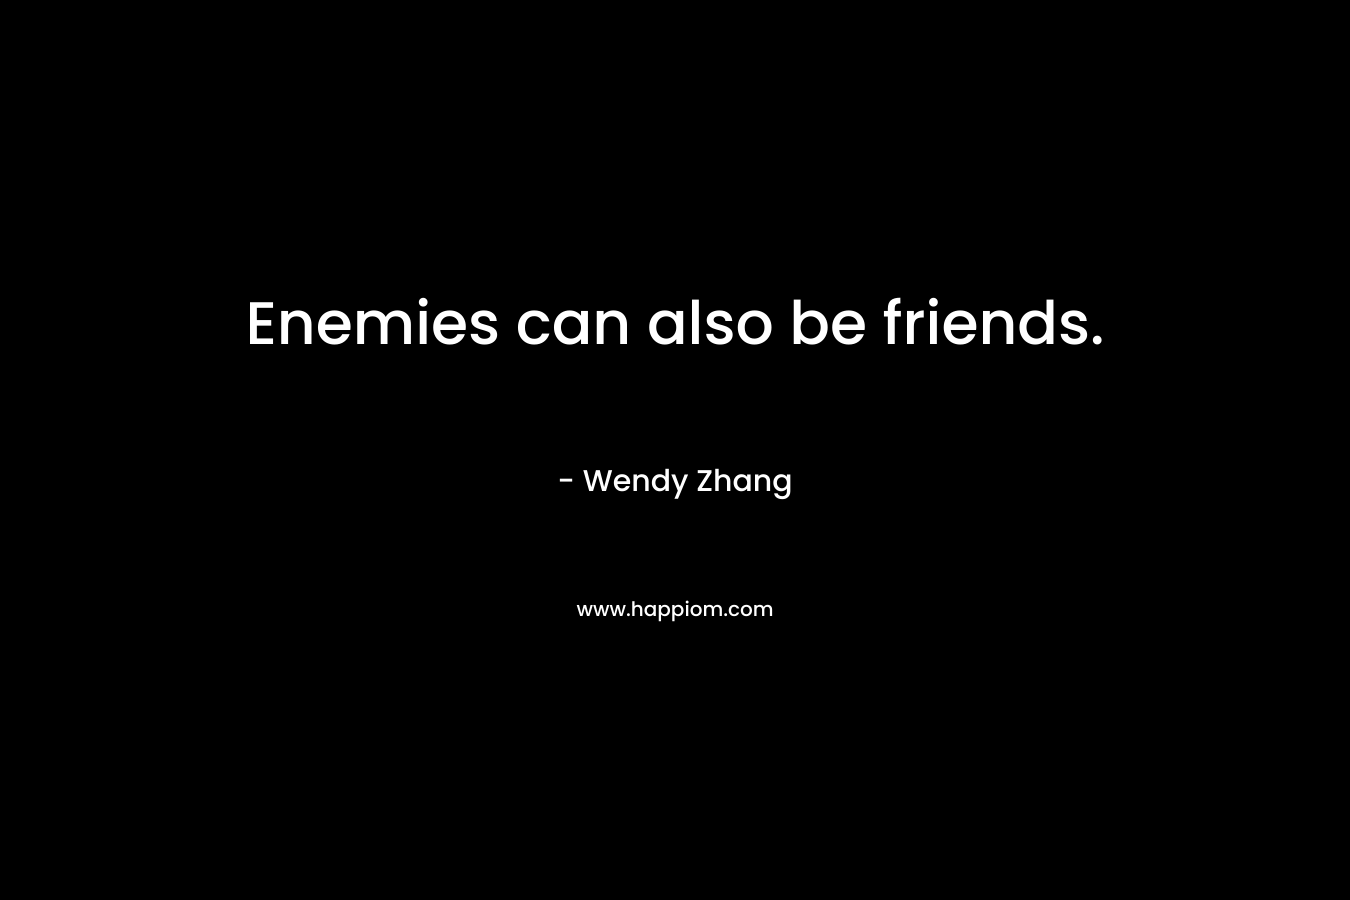 Enemies can also be friends. – Wendy Zhang